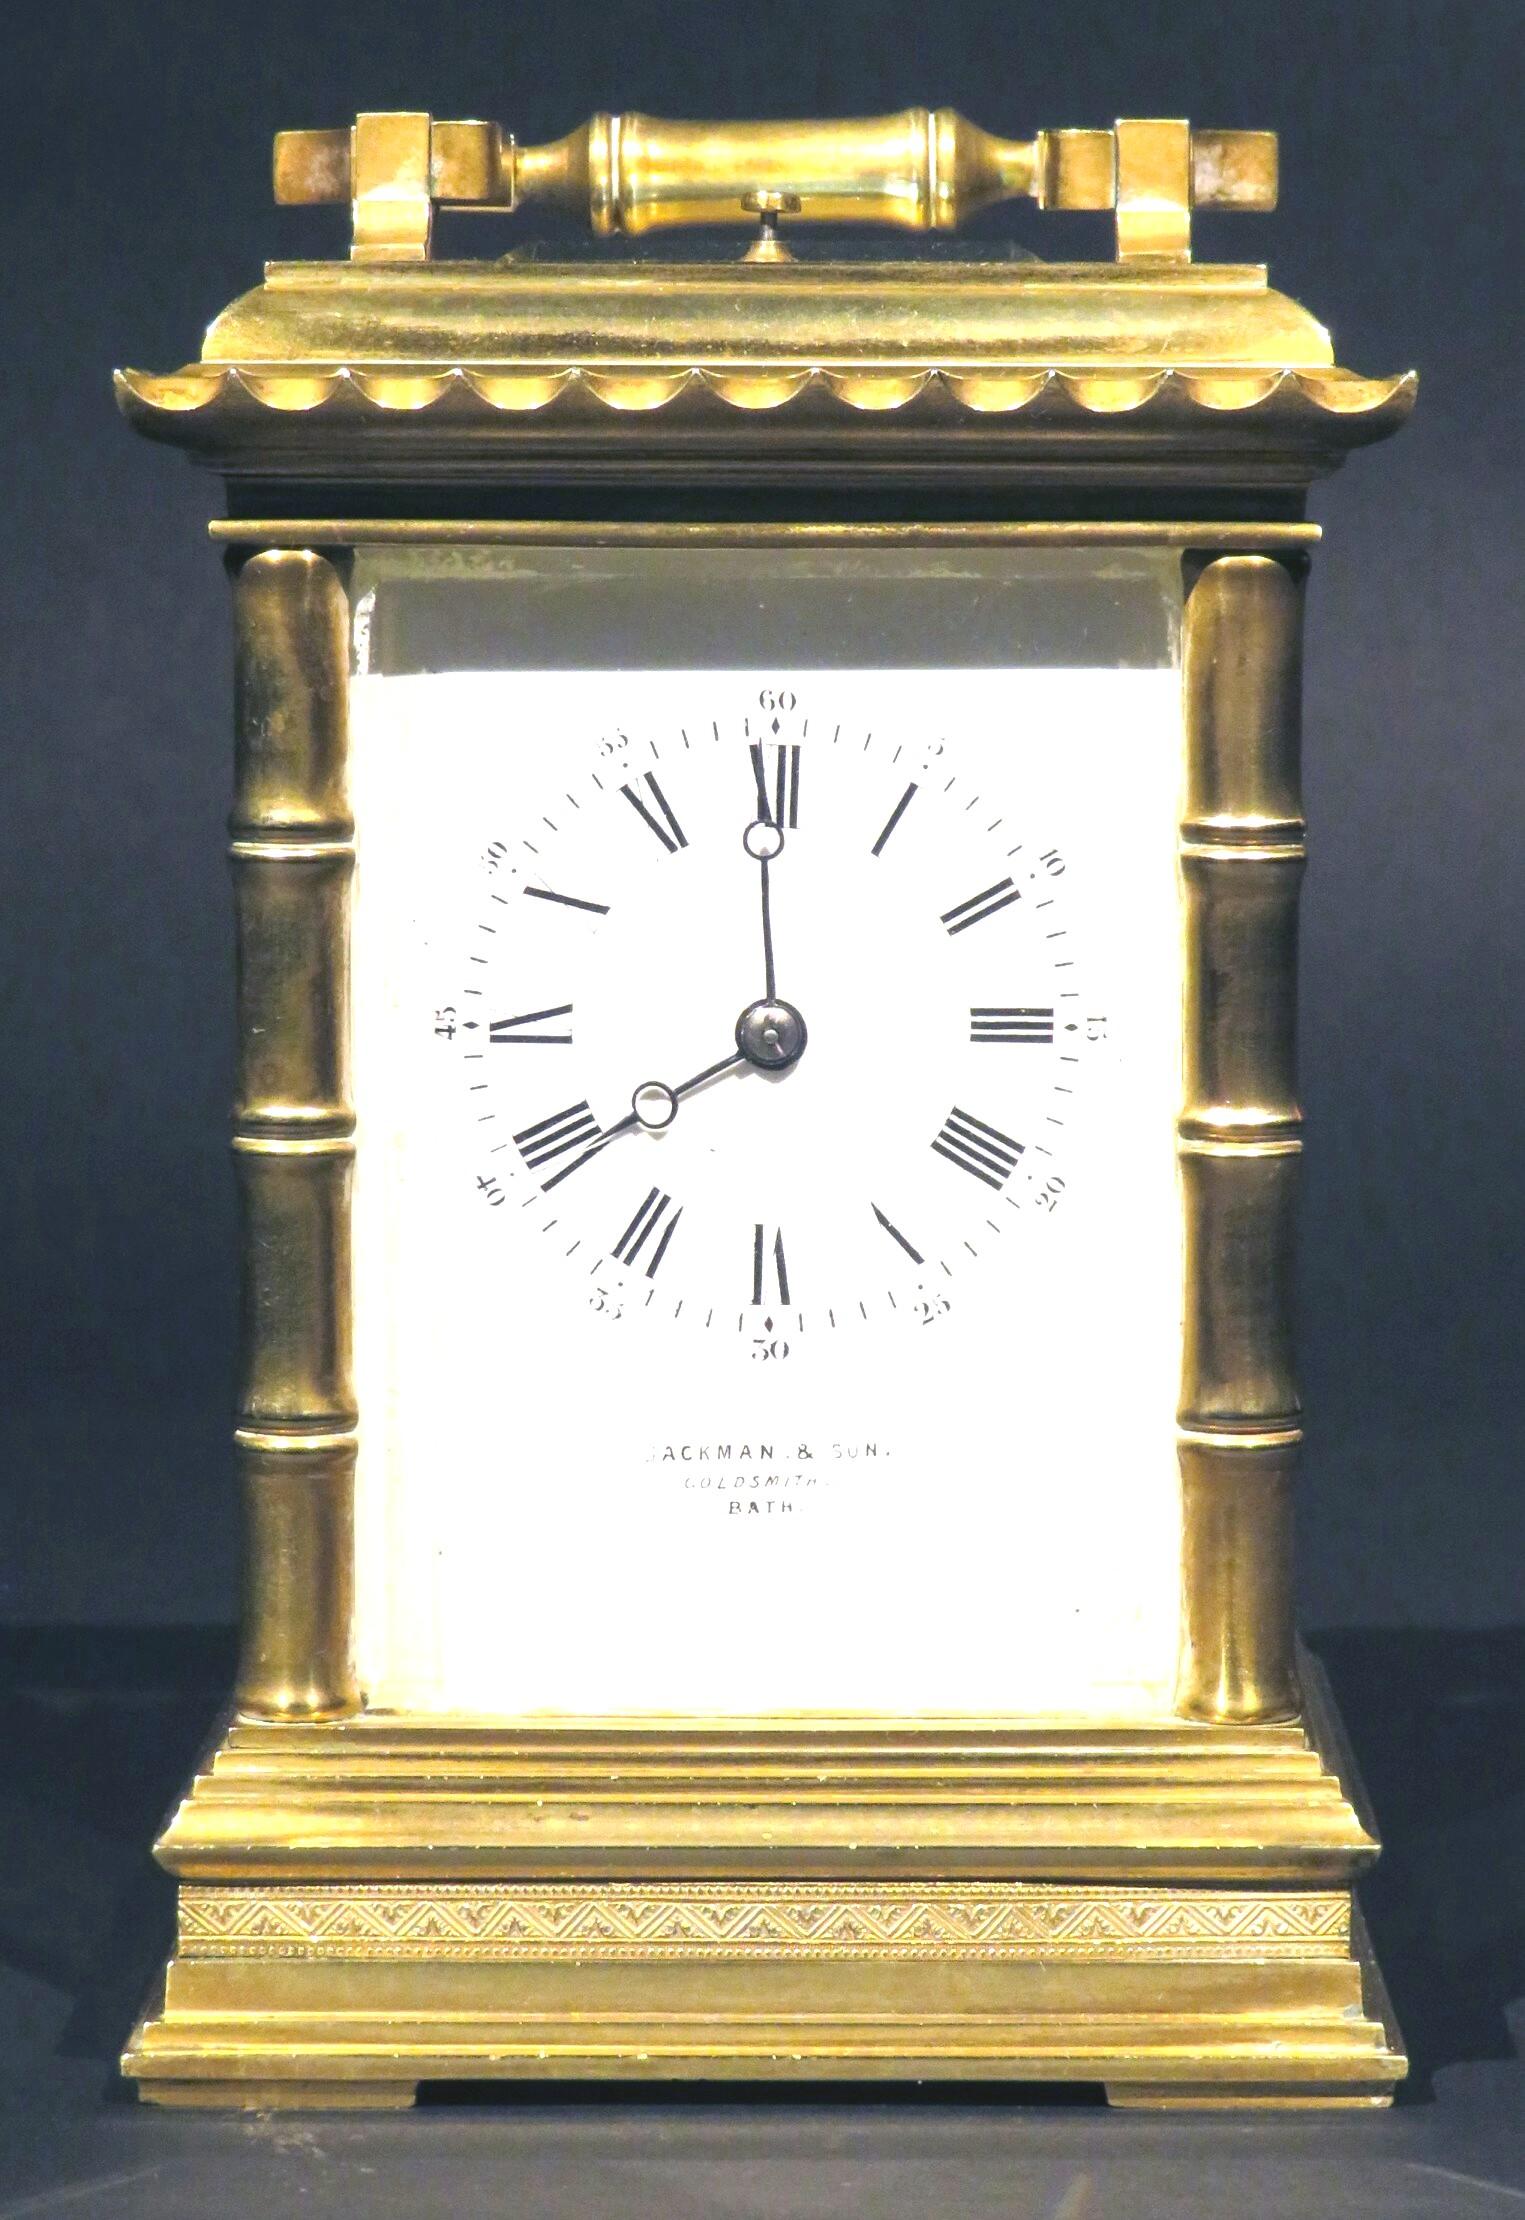 A very handsome & heavy cast 19th century French carriage clock with oriental inspired accents, the case showing stylized bamboo-shaped columns rising to a pagoda-style top fitted with a swing carrying handle and push-tab for the repeat mechanism.